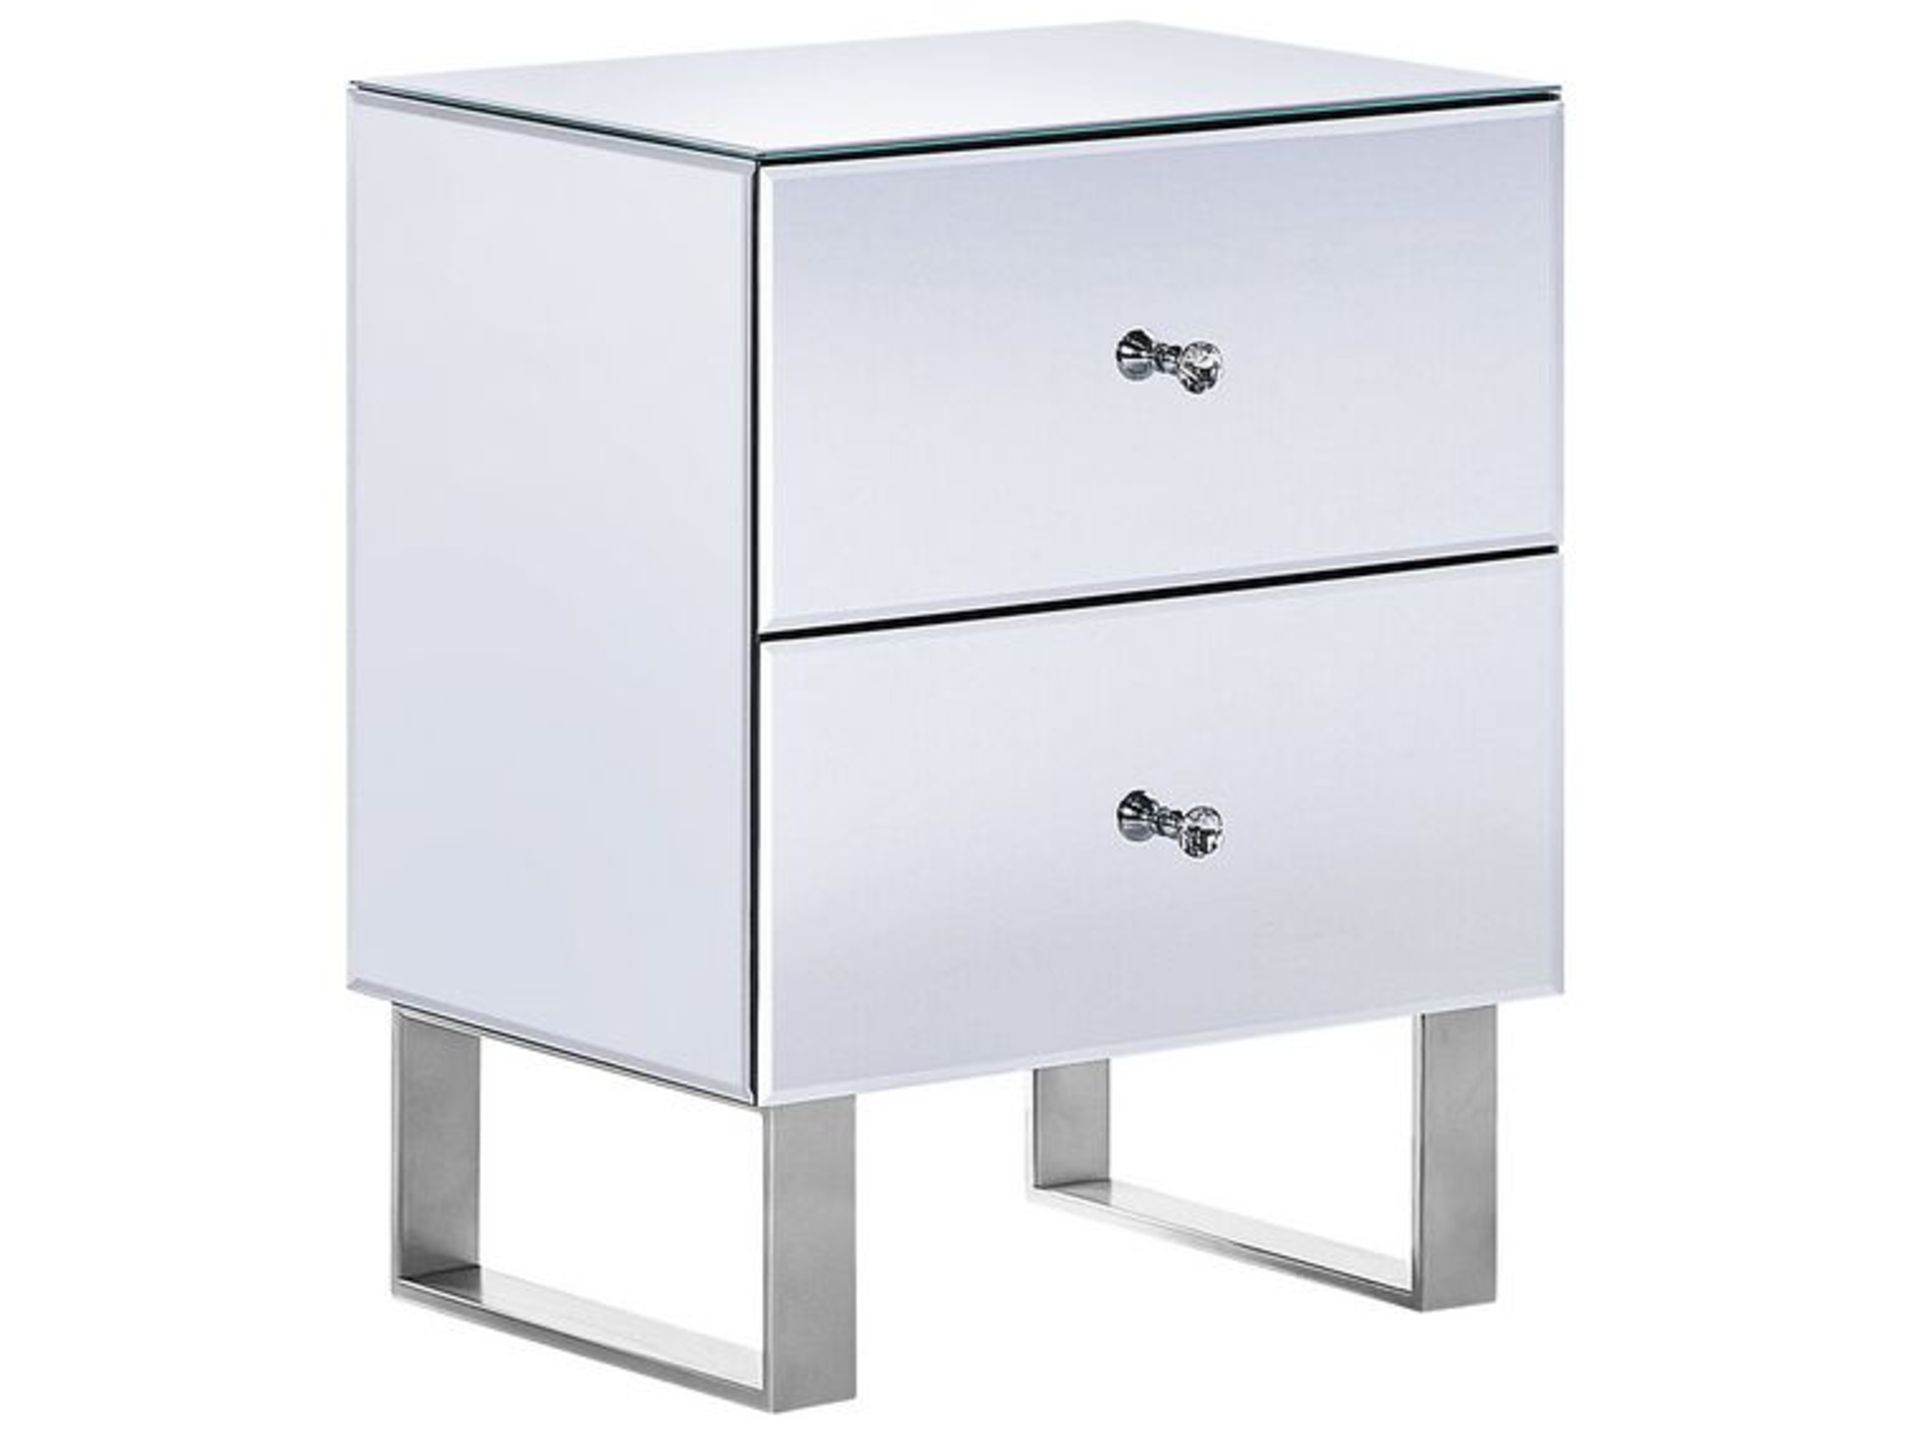 Nesle 2 Drawer Mirrored Bedside Table. - R13a.9. RRP £399.99. Introduce a glam vibe to your